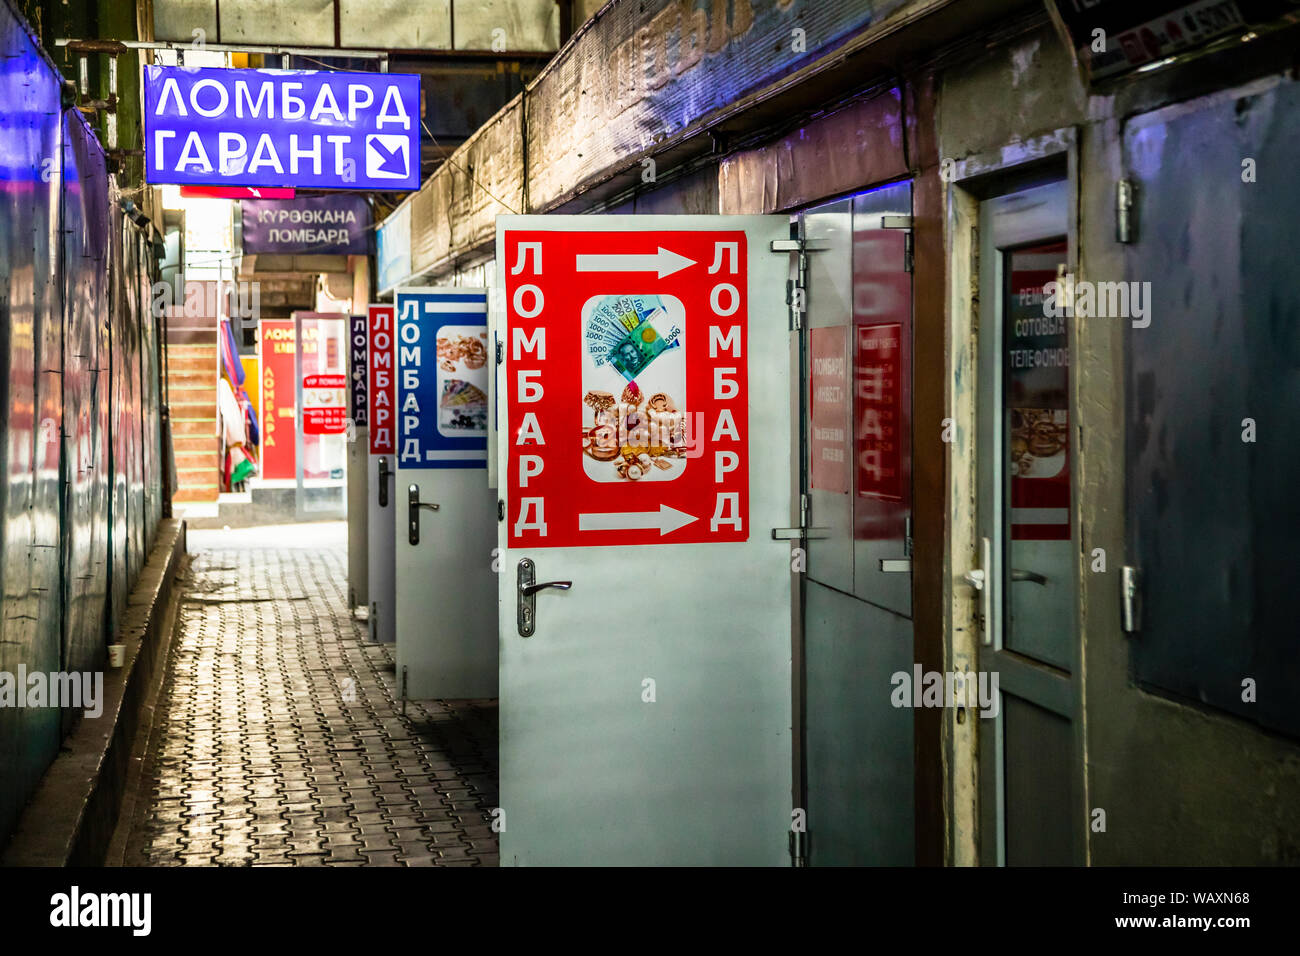 Pawnshops in the City of Osh, Kyrgyzstan Stock Photo